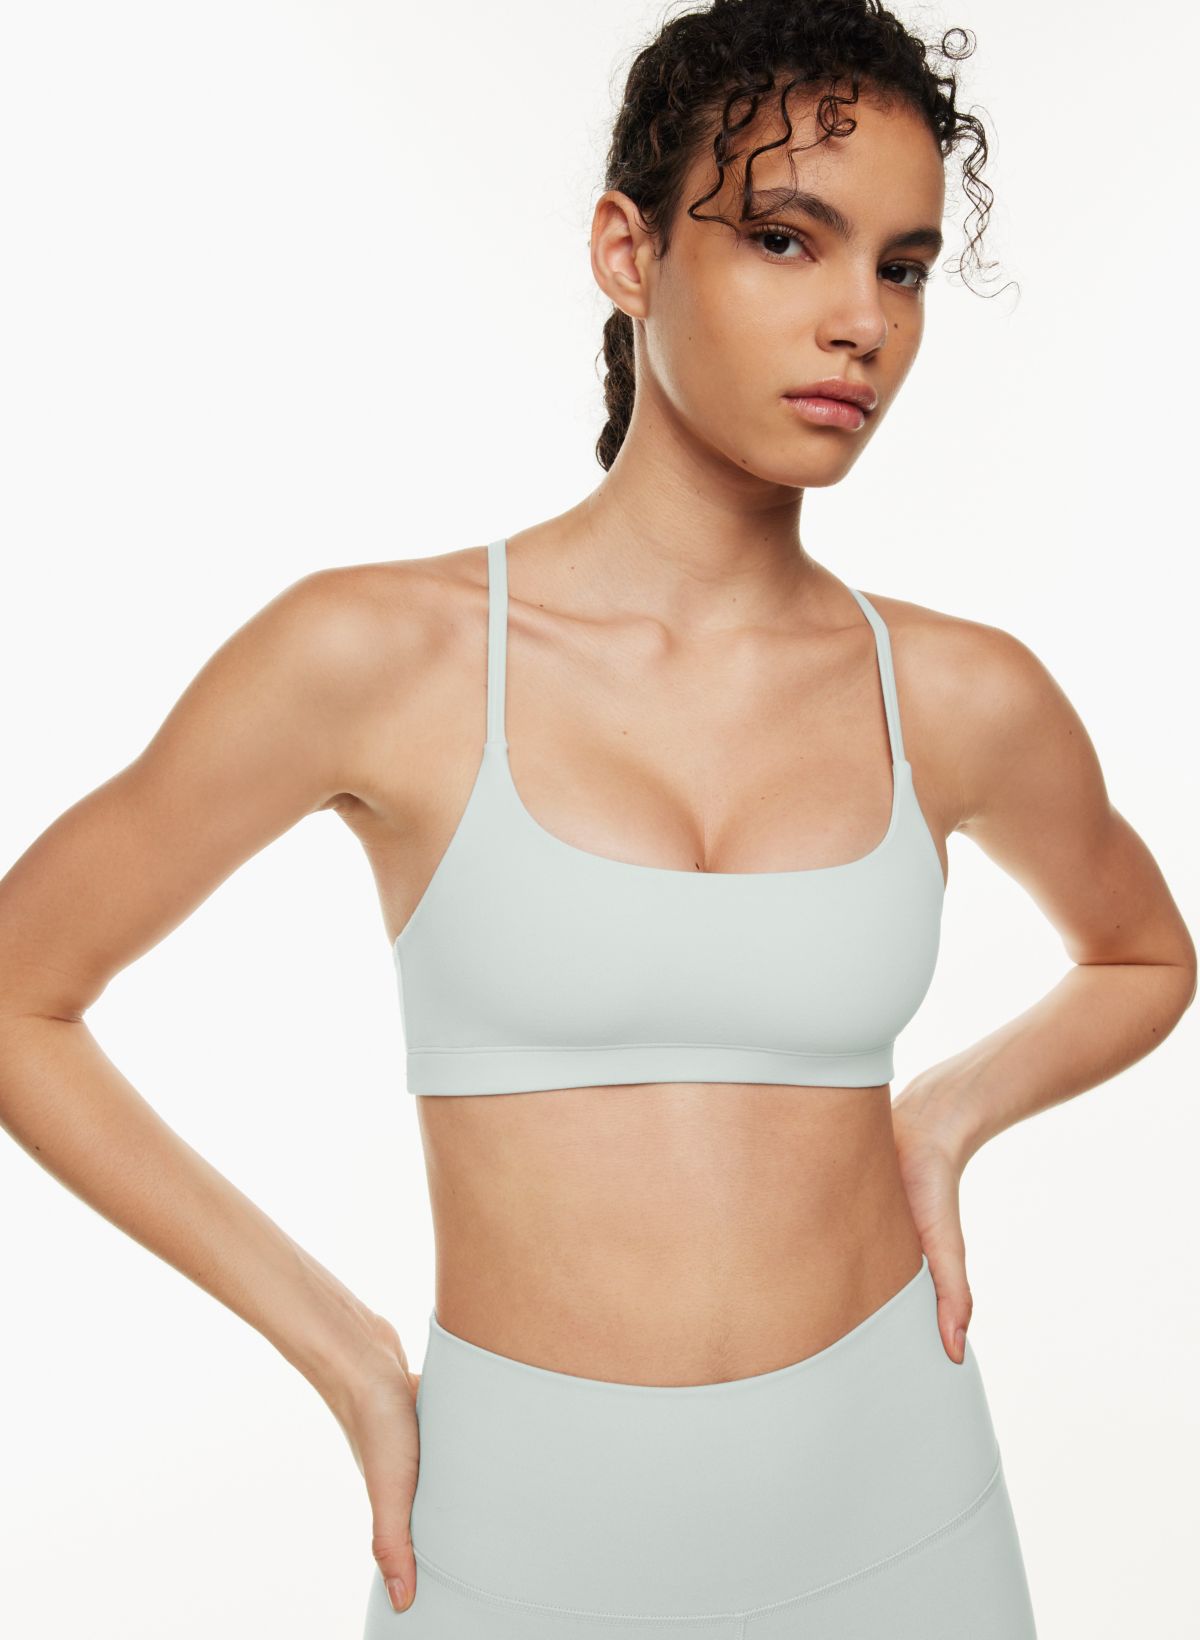 FIGS Sports Bra Gray Size M - $16 (54% Off Retail) - From Katlyn